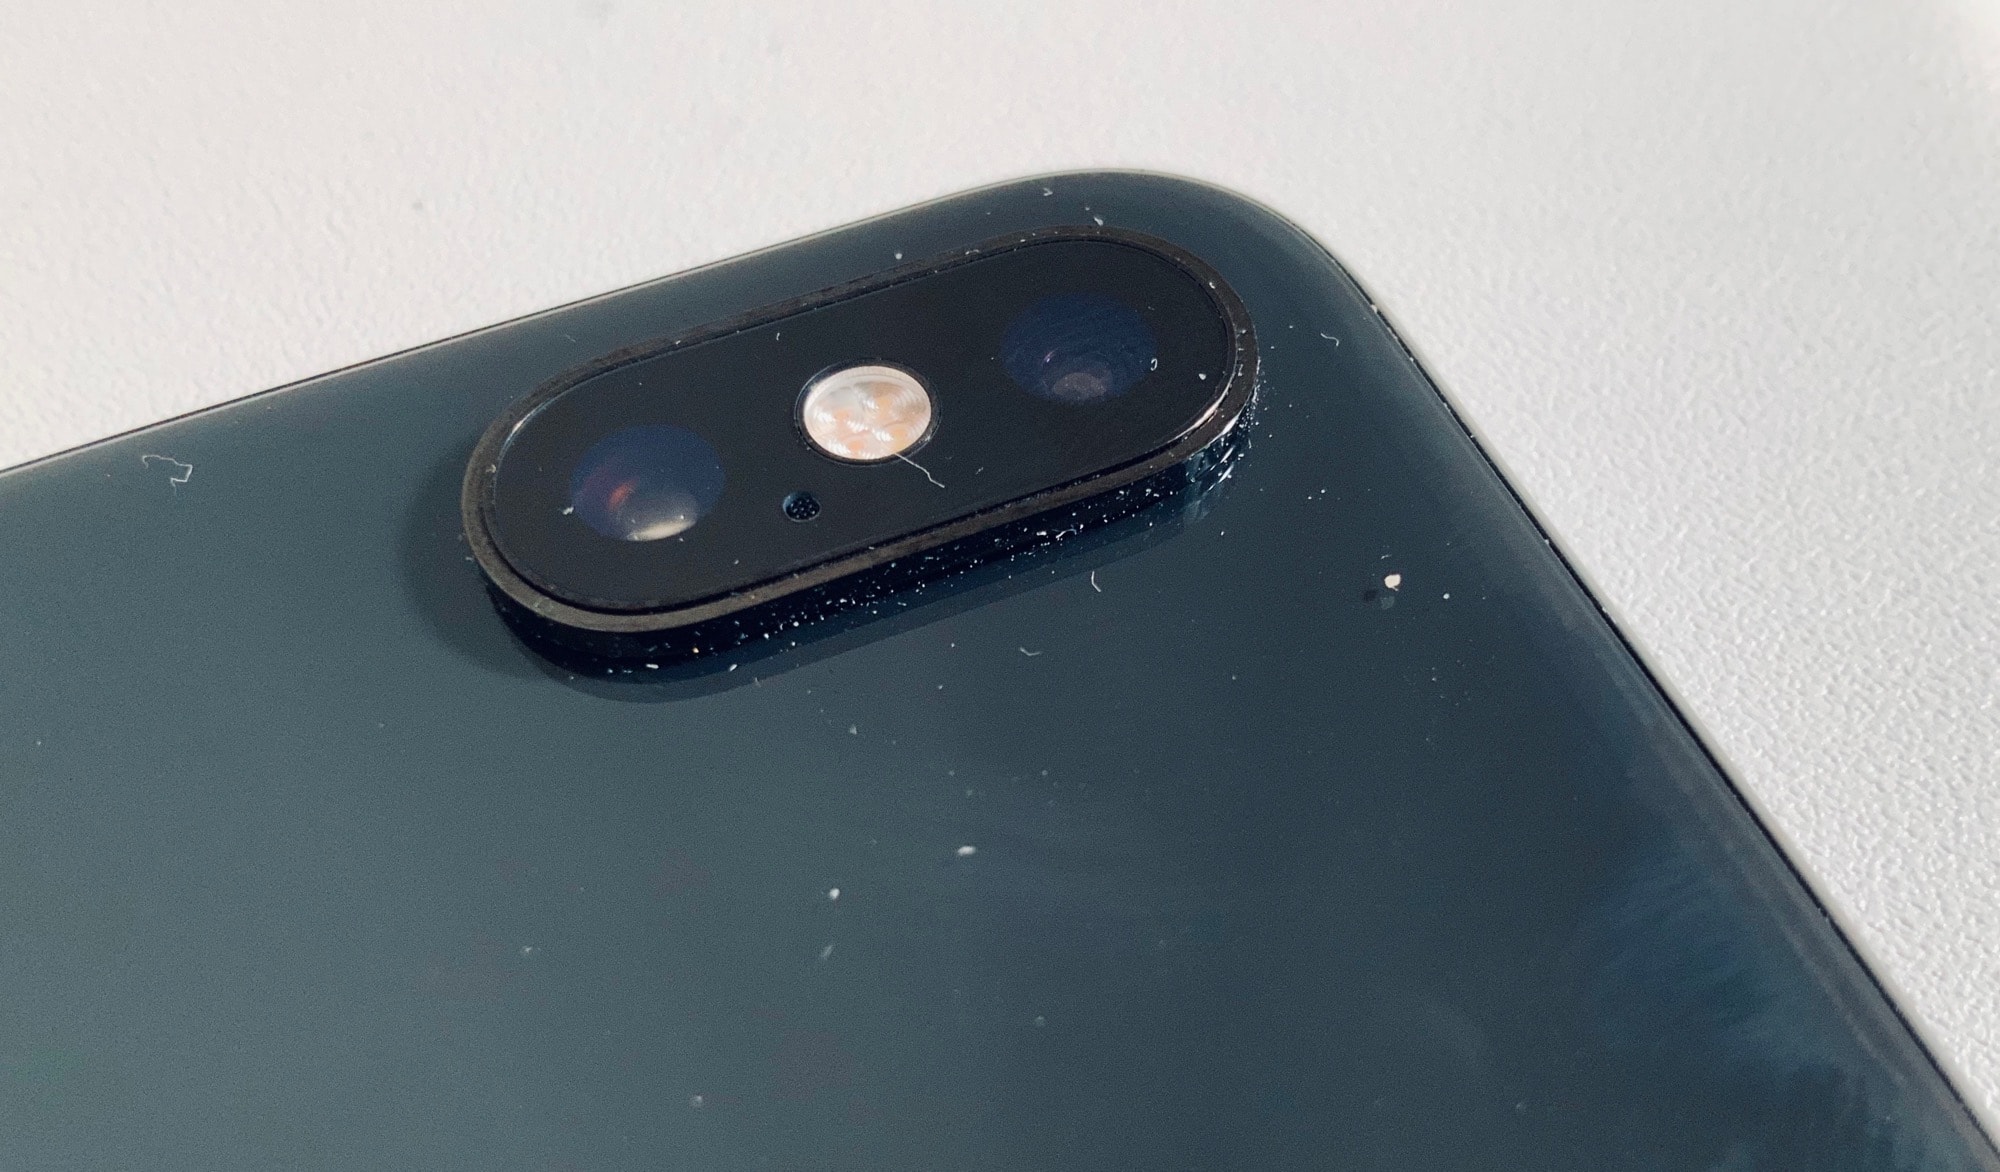 Dust and lint are not your iPhone's friends. Find out how to fight them (and get even more handy how-tos).